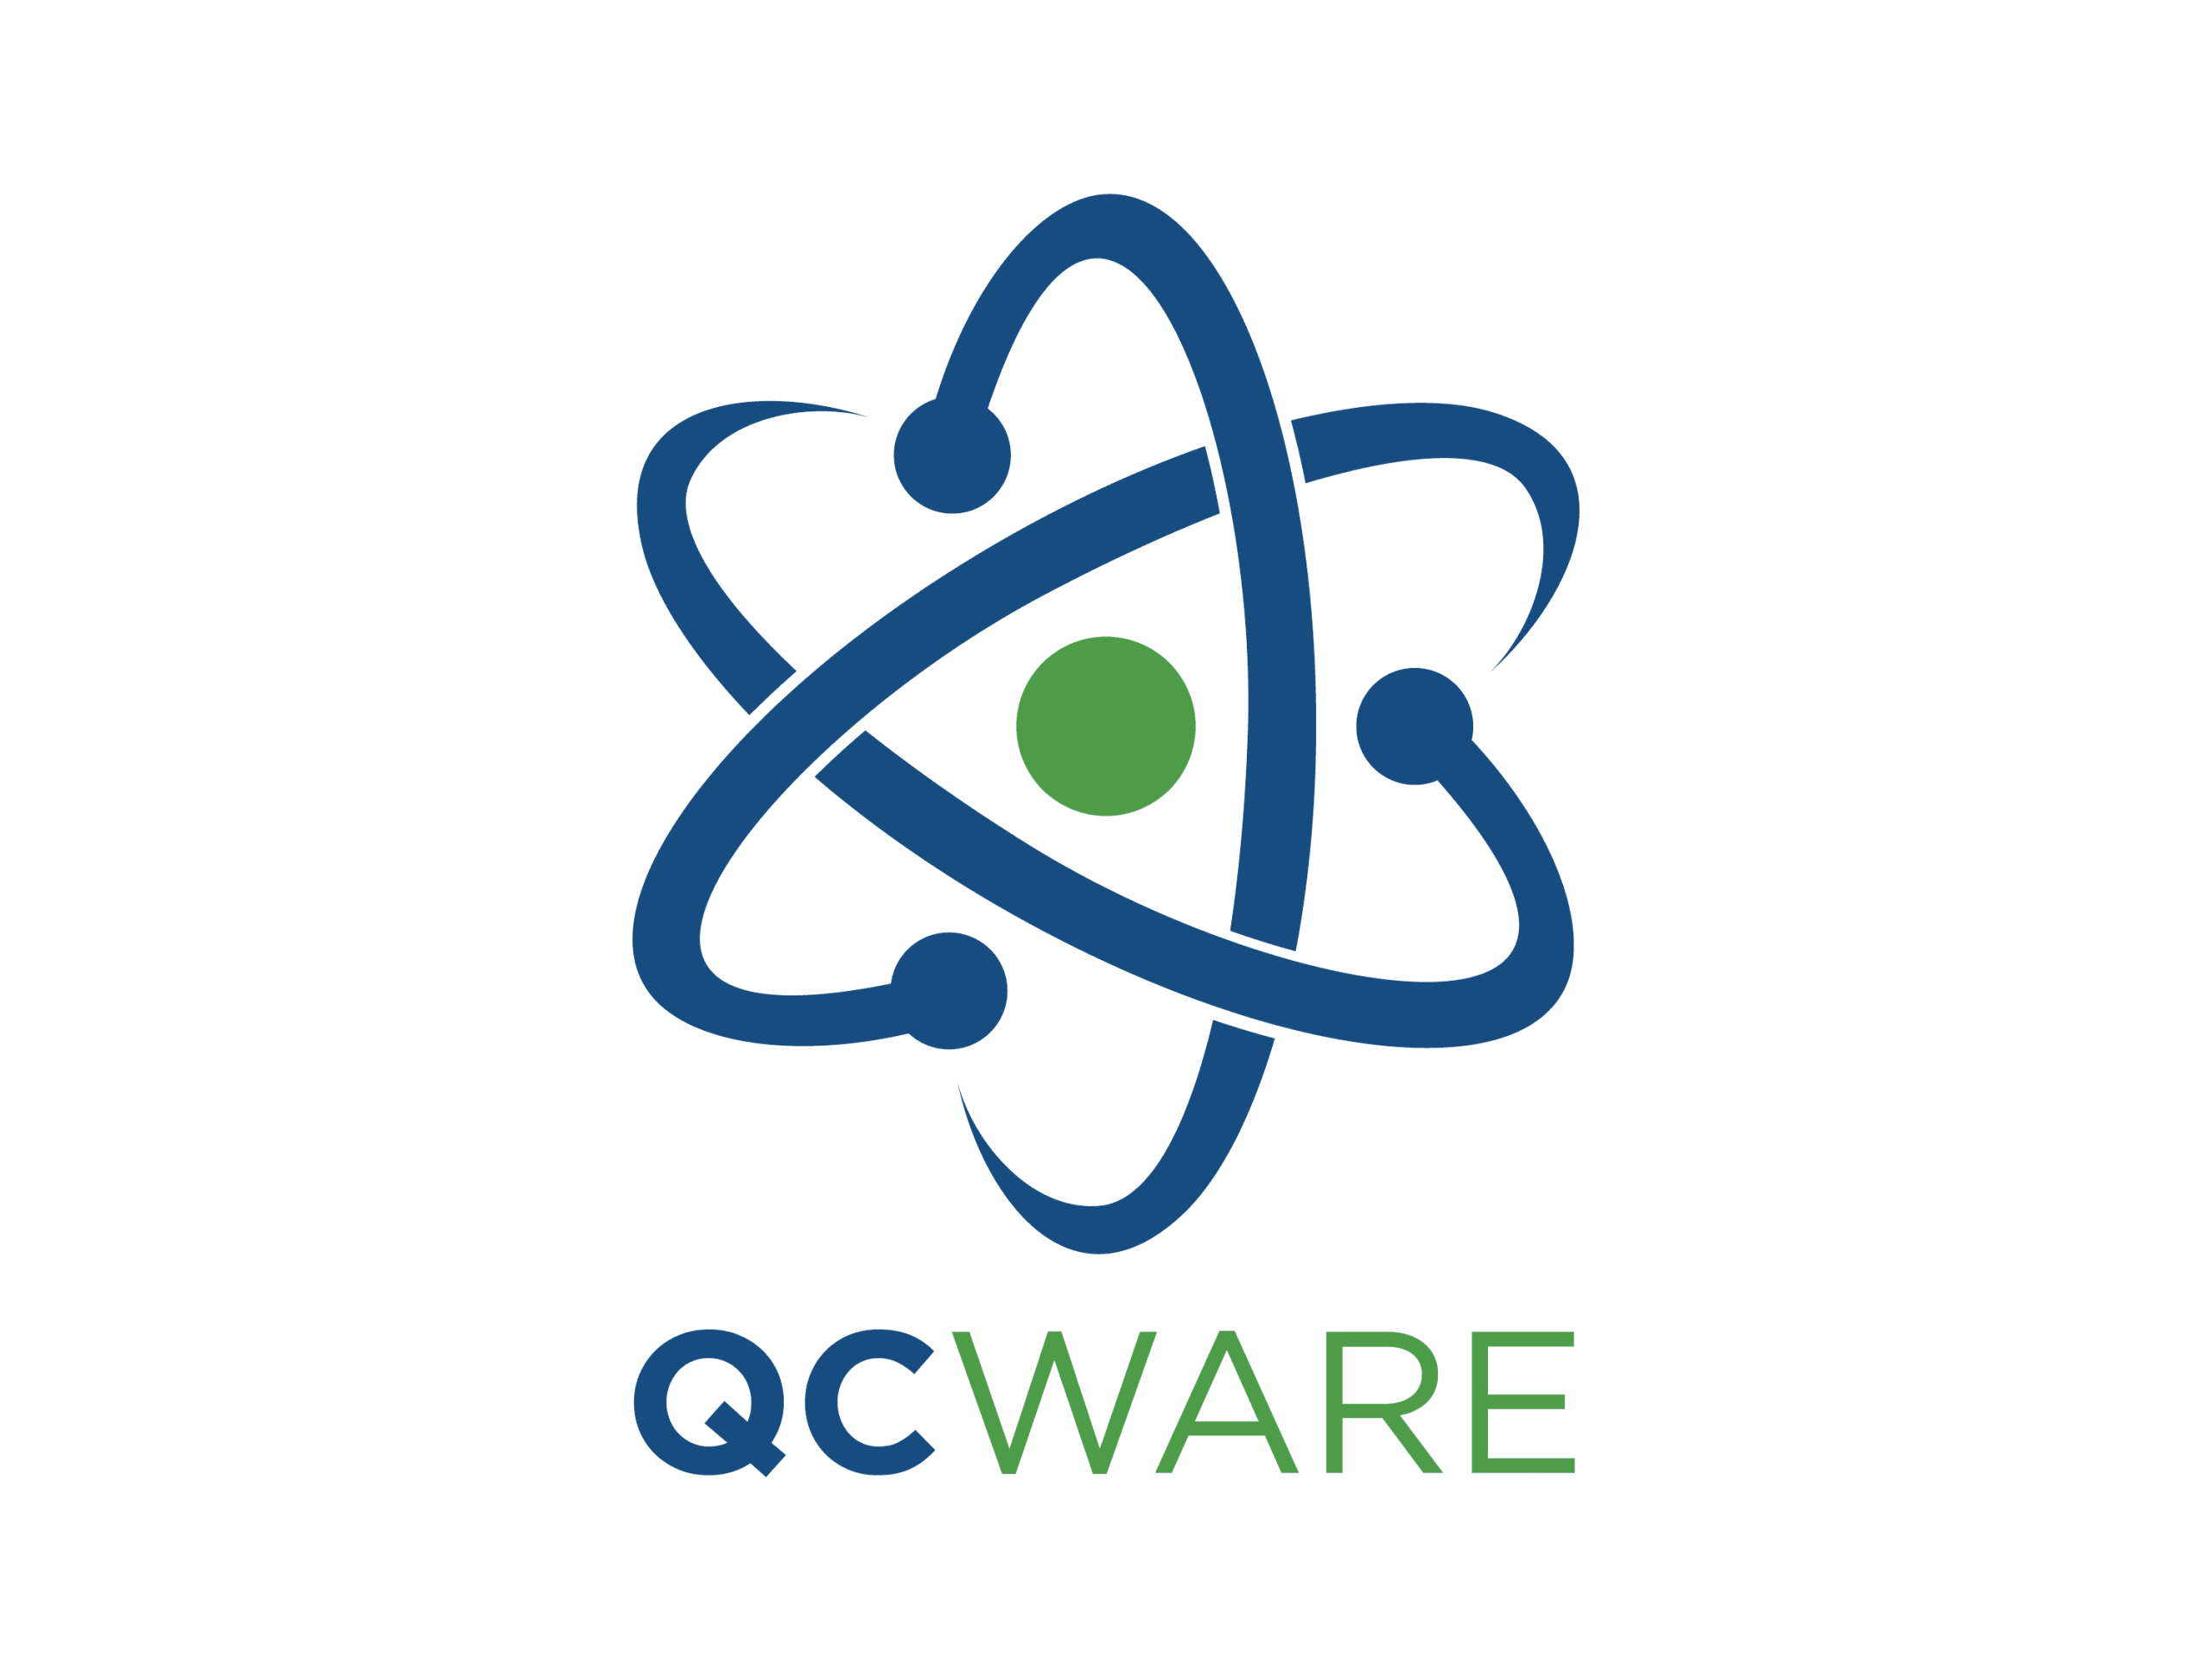 Qc Ware Raises $25 Million To Accelerate The Development Of Near-Term Quantum Hardware For Industry Applications